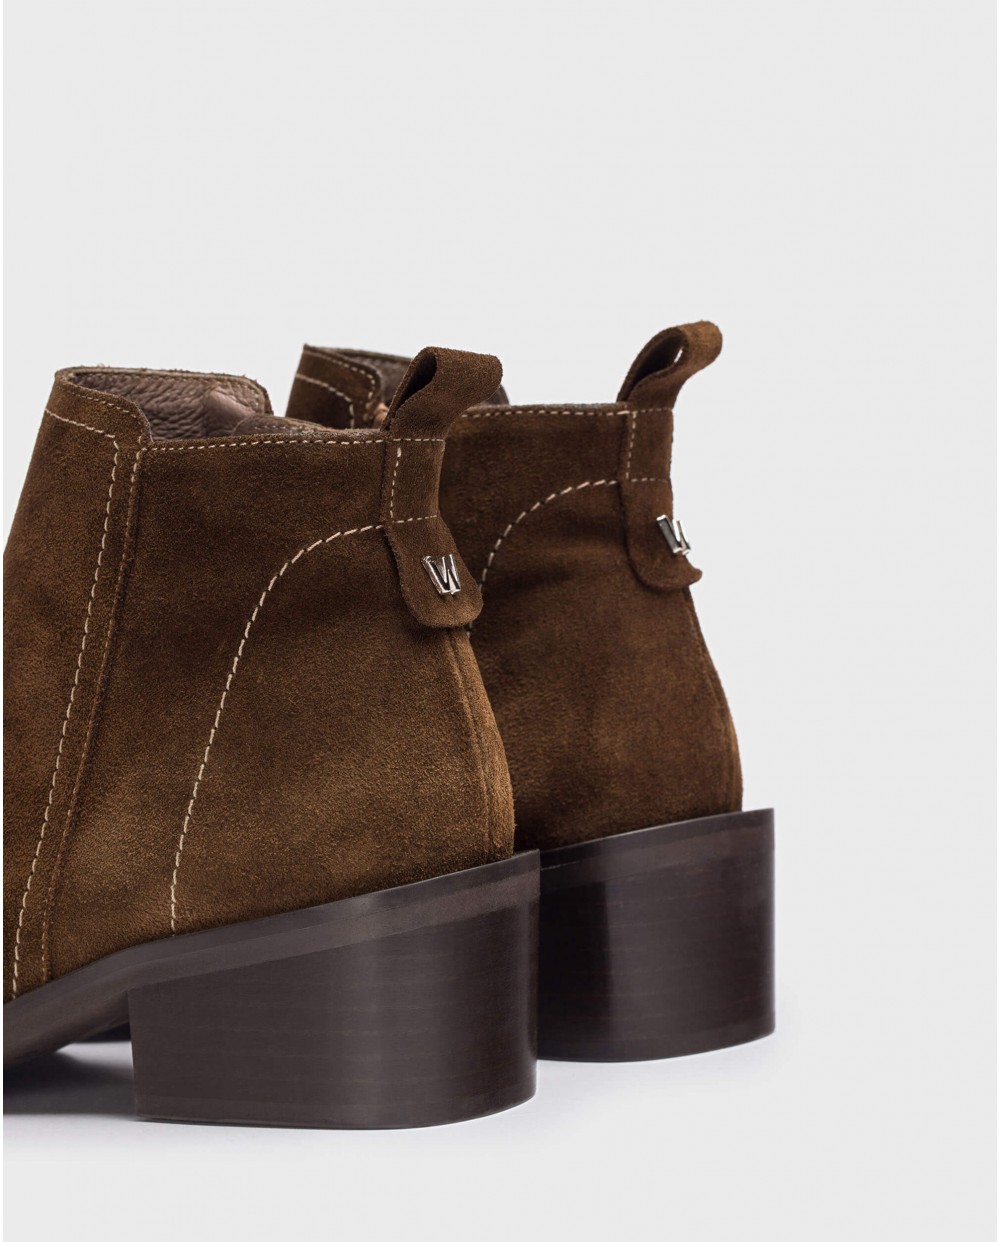 Wonders-Ankle Boots-Brown NOVA ankle boot